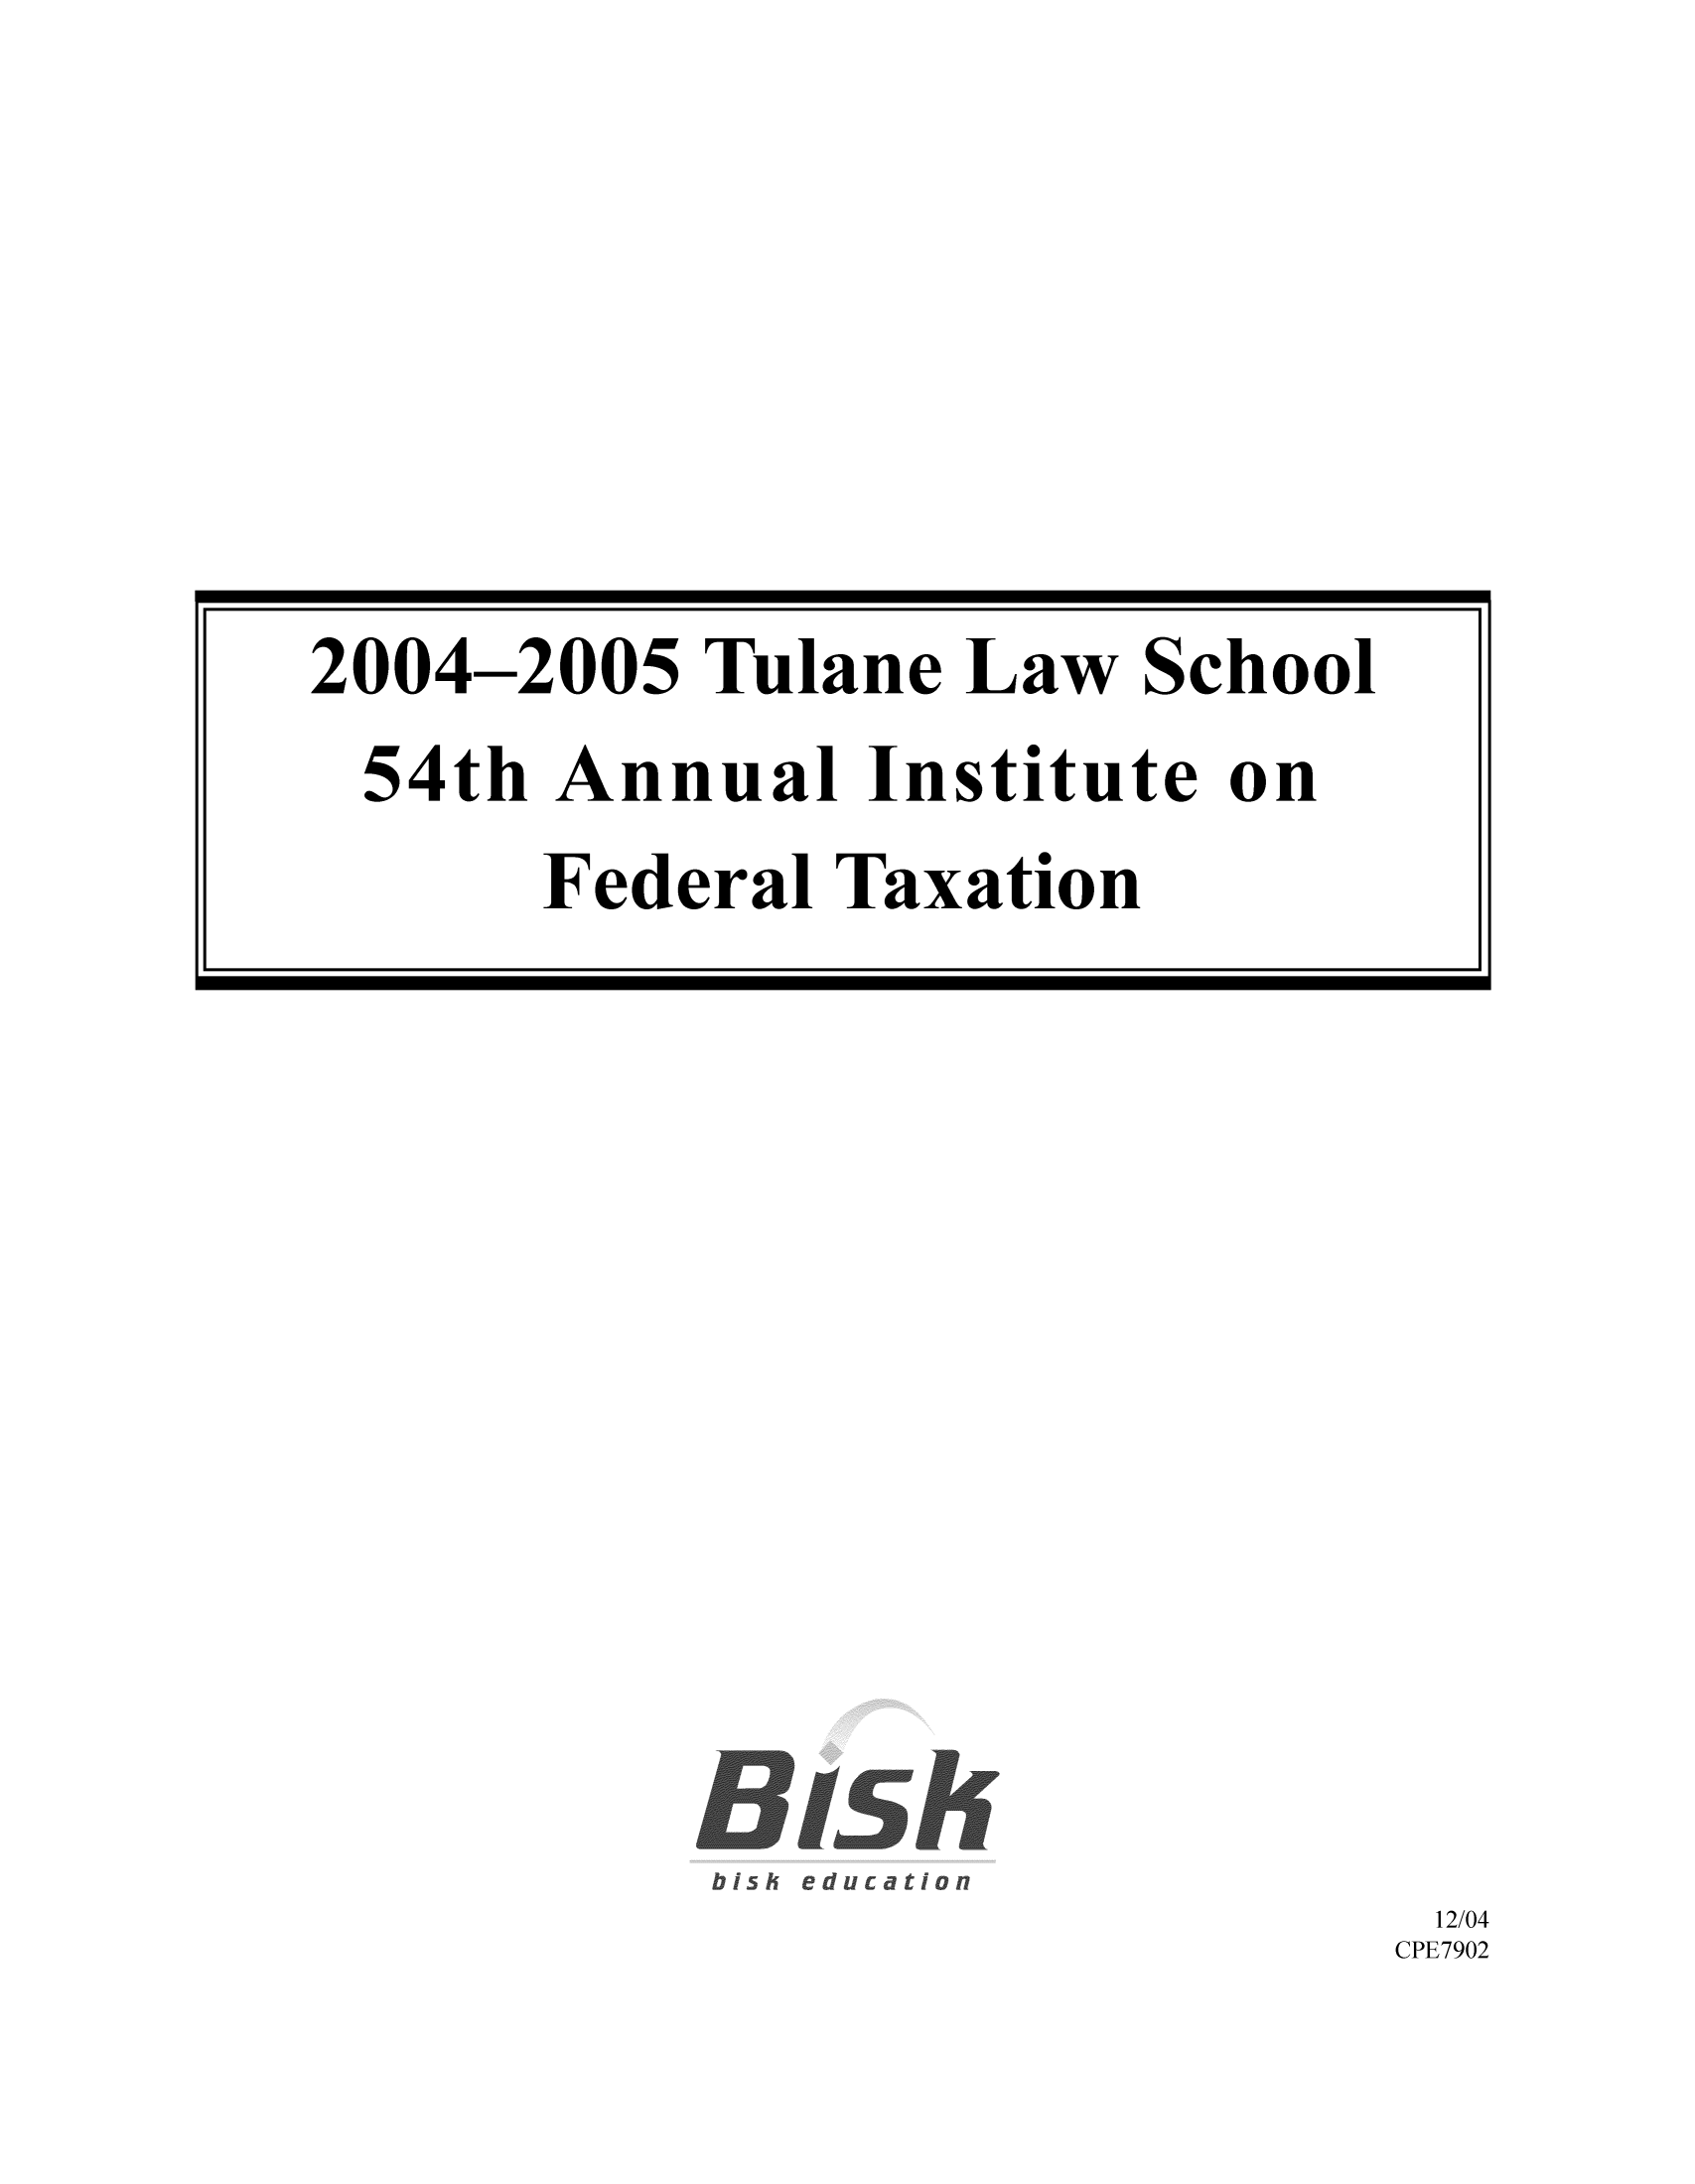 handle is hein.journals/tutain54 and id is 1 raw text is: 12/04
CPE7902

2004-2005 Tulane Law School
54th Annual Institute on
Federal Taxation


